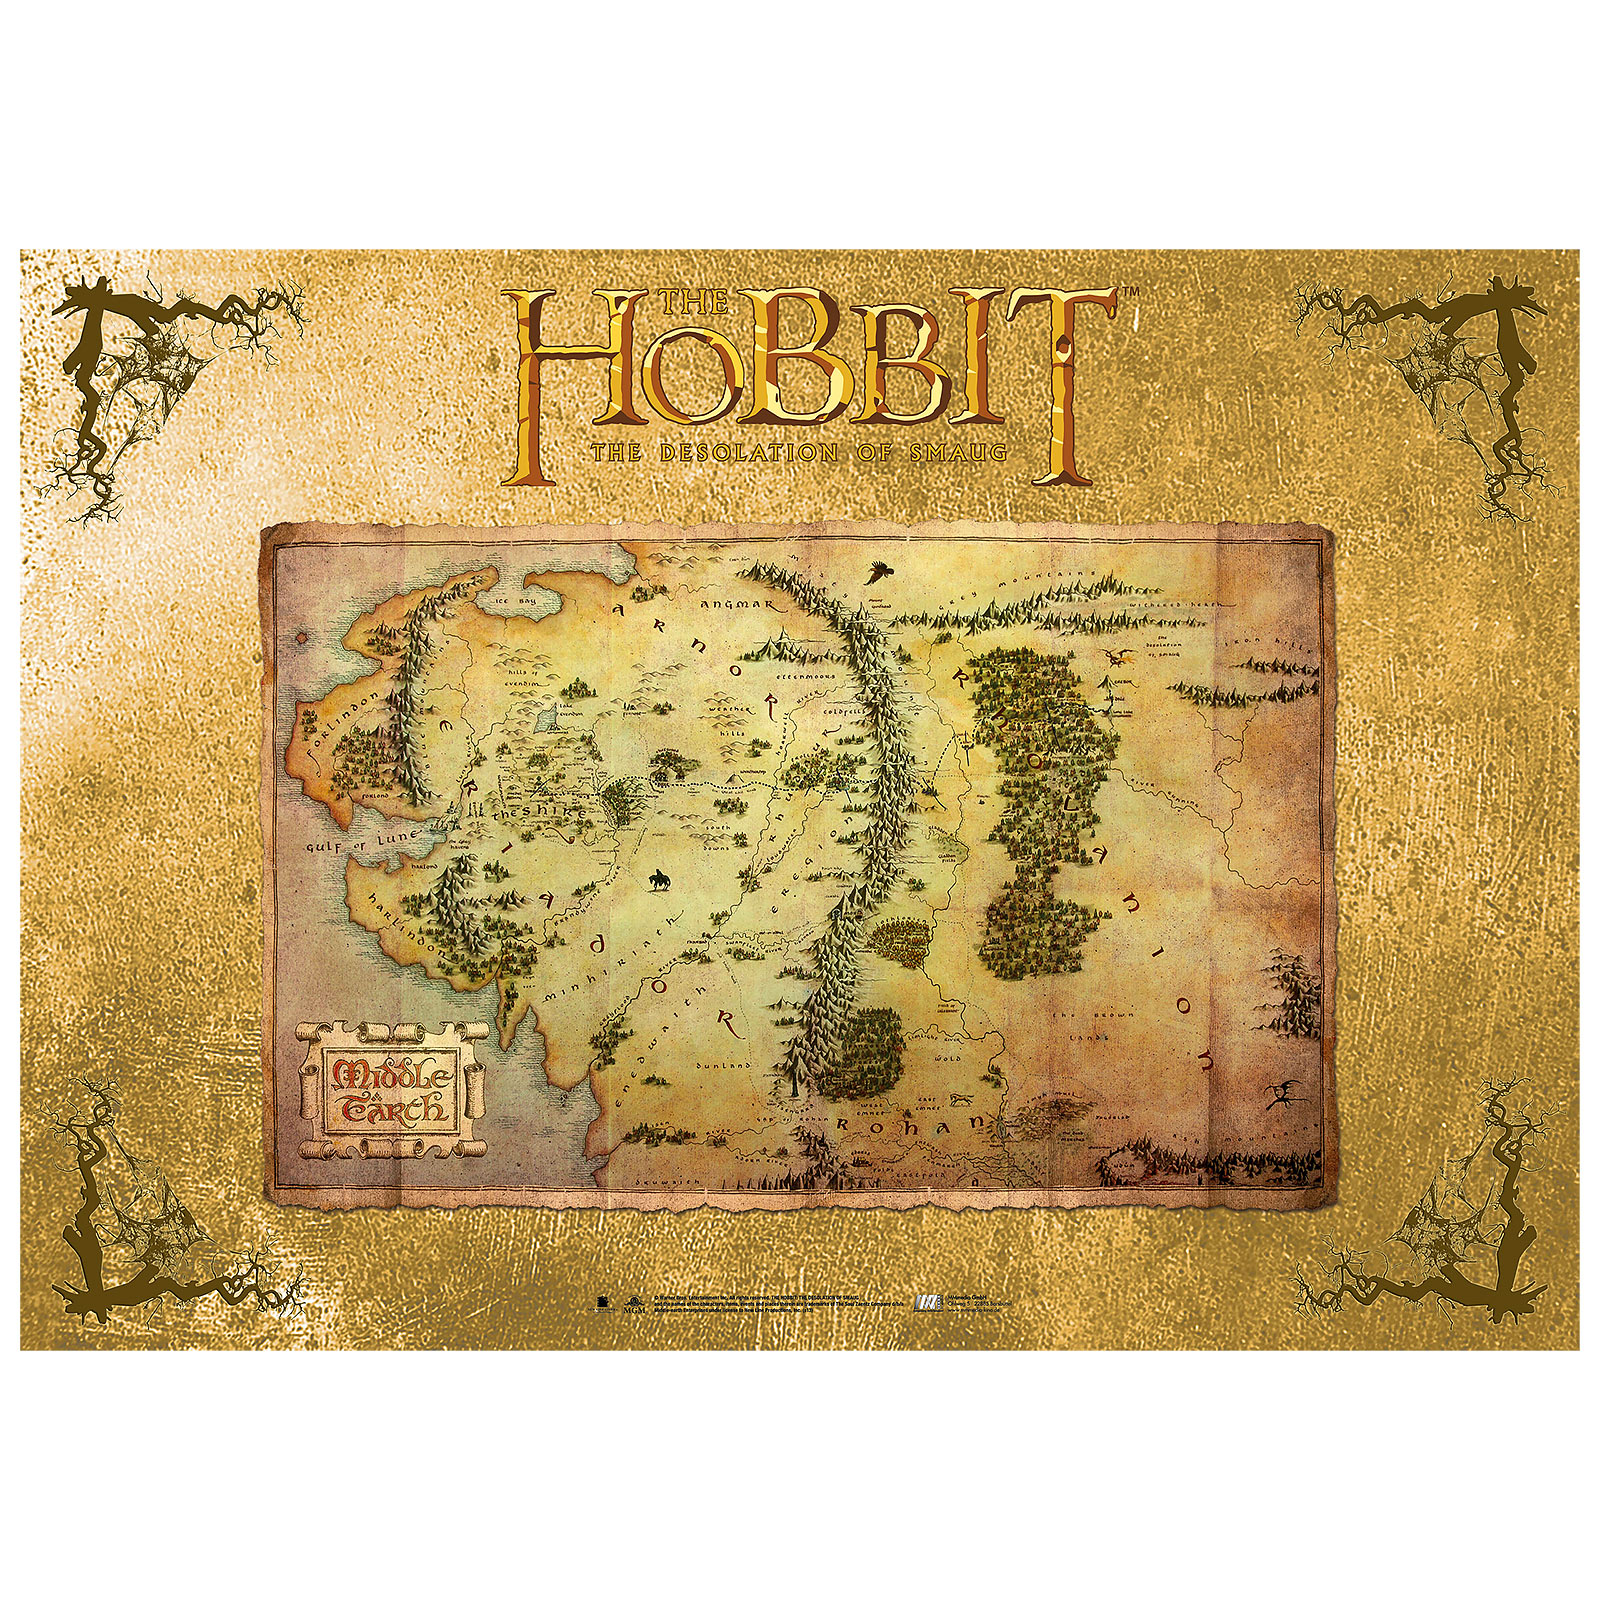 The Hobbit - Middle Earth Map Maxi Poster